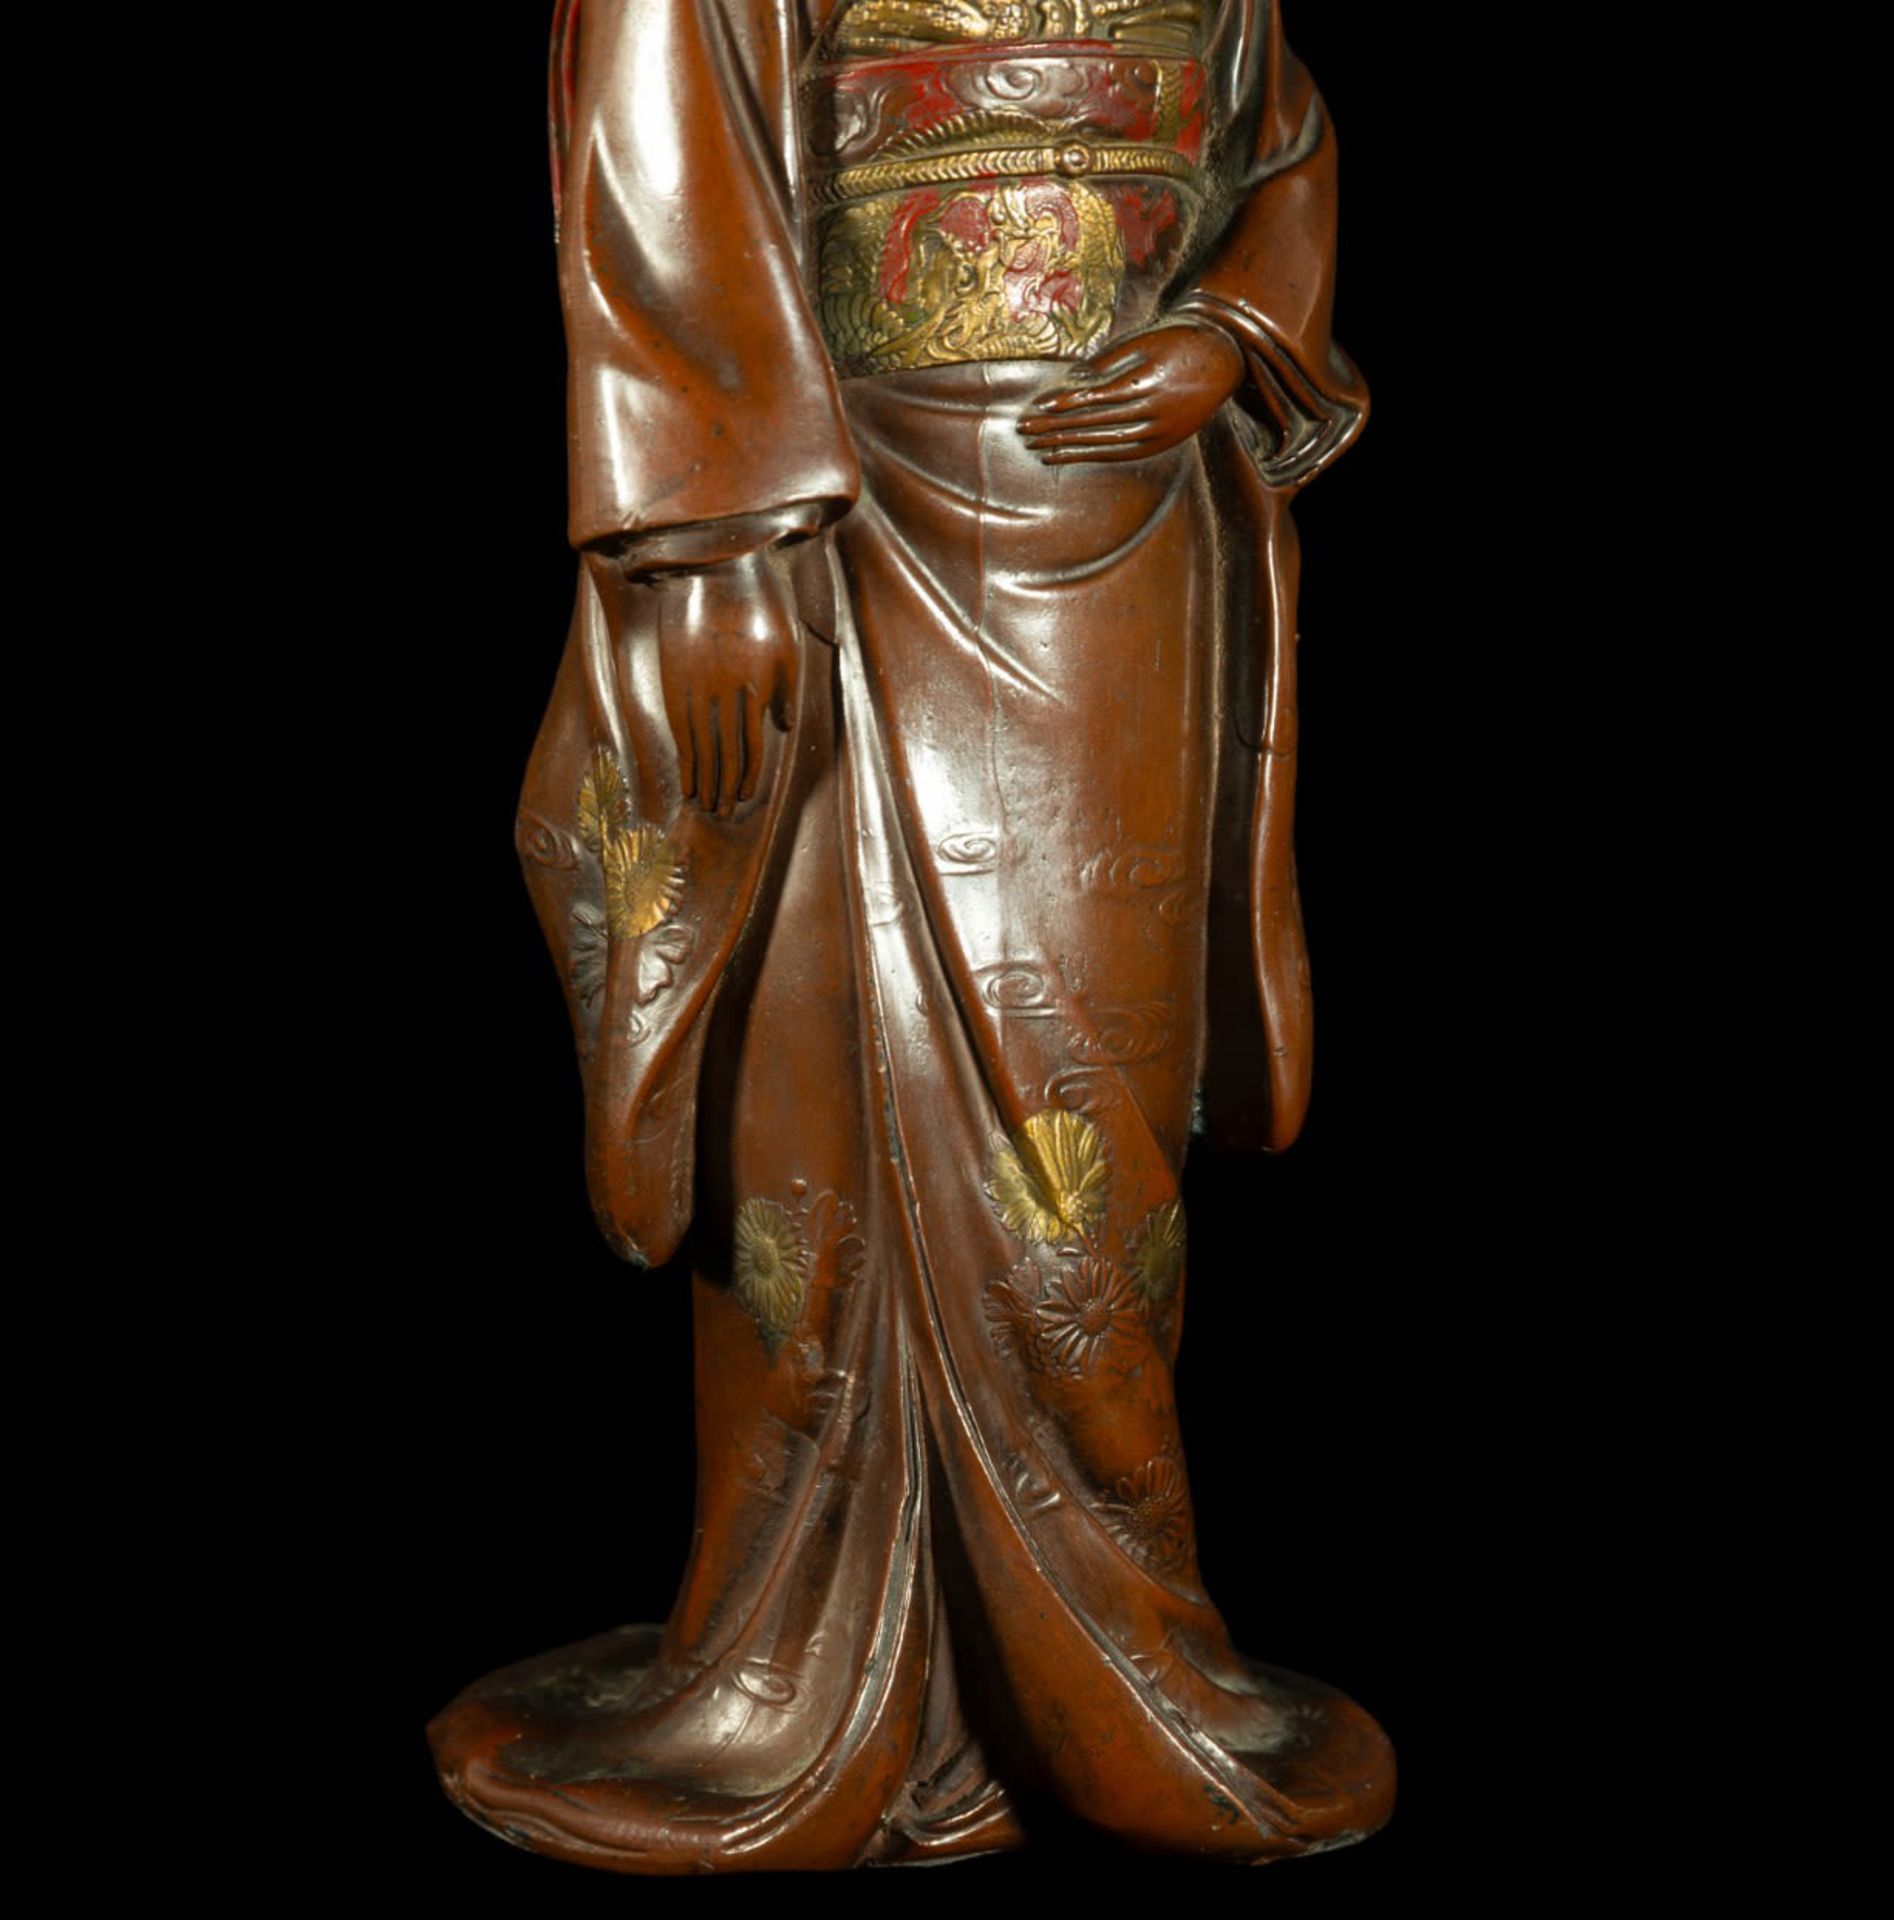 Exquisite Japanese Meiji Geisha in carved and gold-gilt "repoussé" copper, 19th century - Image 6 of 7